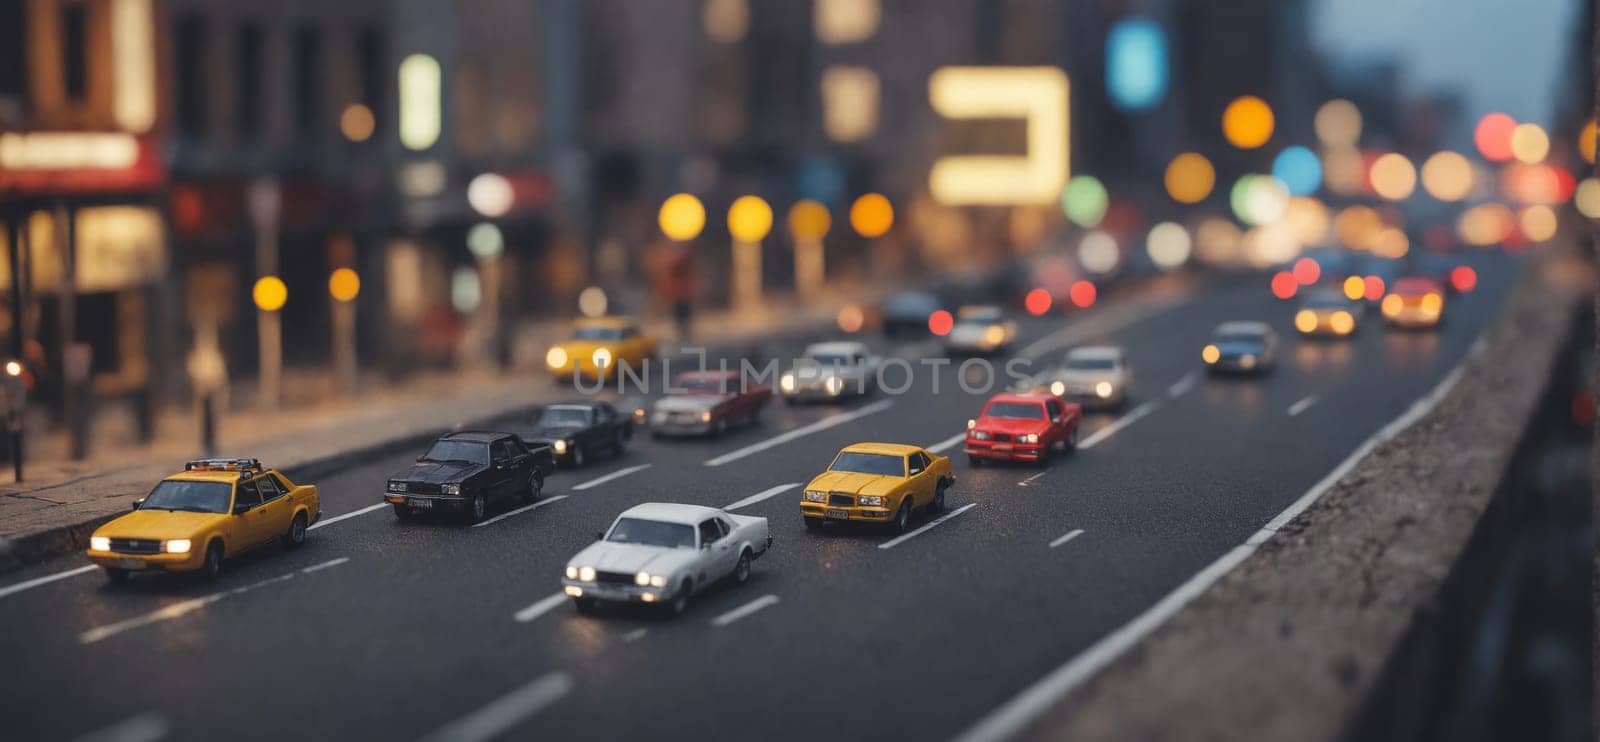 Experience the magic of a bustling cityscape transformed into a toy-like miniature world through tilt-shift photography.